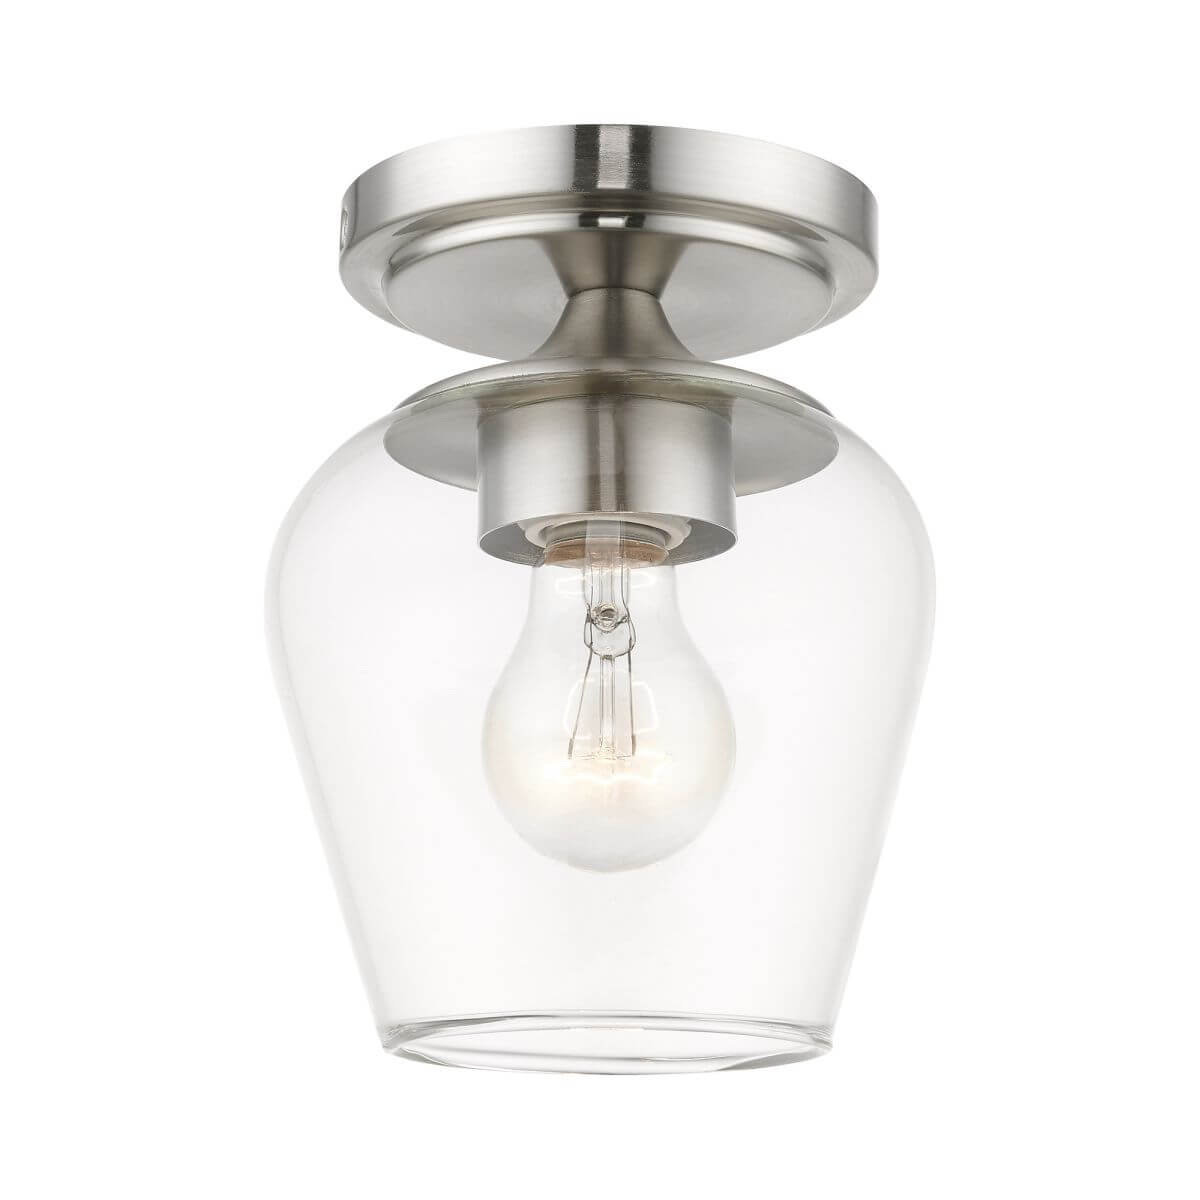 Livex 46720-91 Willow 1 Light 6 inch Flush Mount in Brushed Nickel with Clear Glass